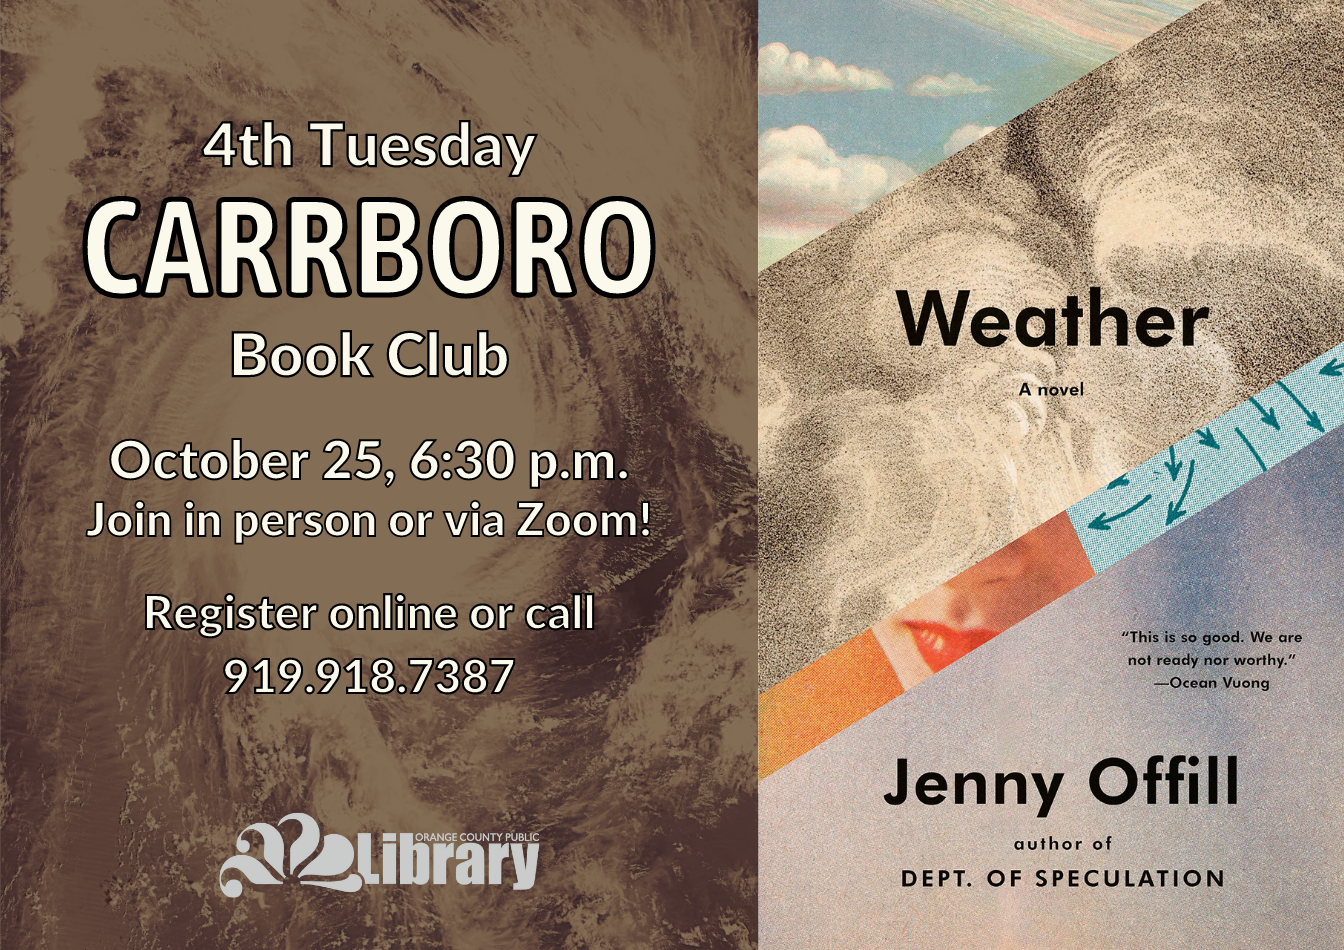 A flyer with a photo of a storm system and the cover of this month's book, Weather by Jenny Offill. The cover is a collage of different cloud patterns and weather charts. Flyer text: Fourth Tuesday Carrboro Book Club. October 25, 6:30 pm. Join in person or via Zoom! Register online or call 919-918-7387.